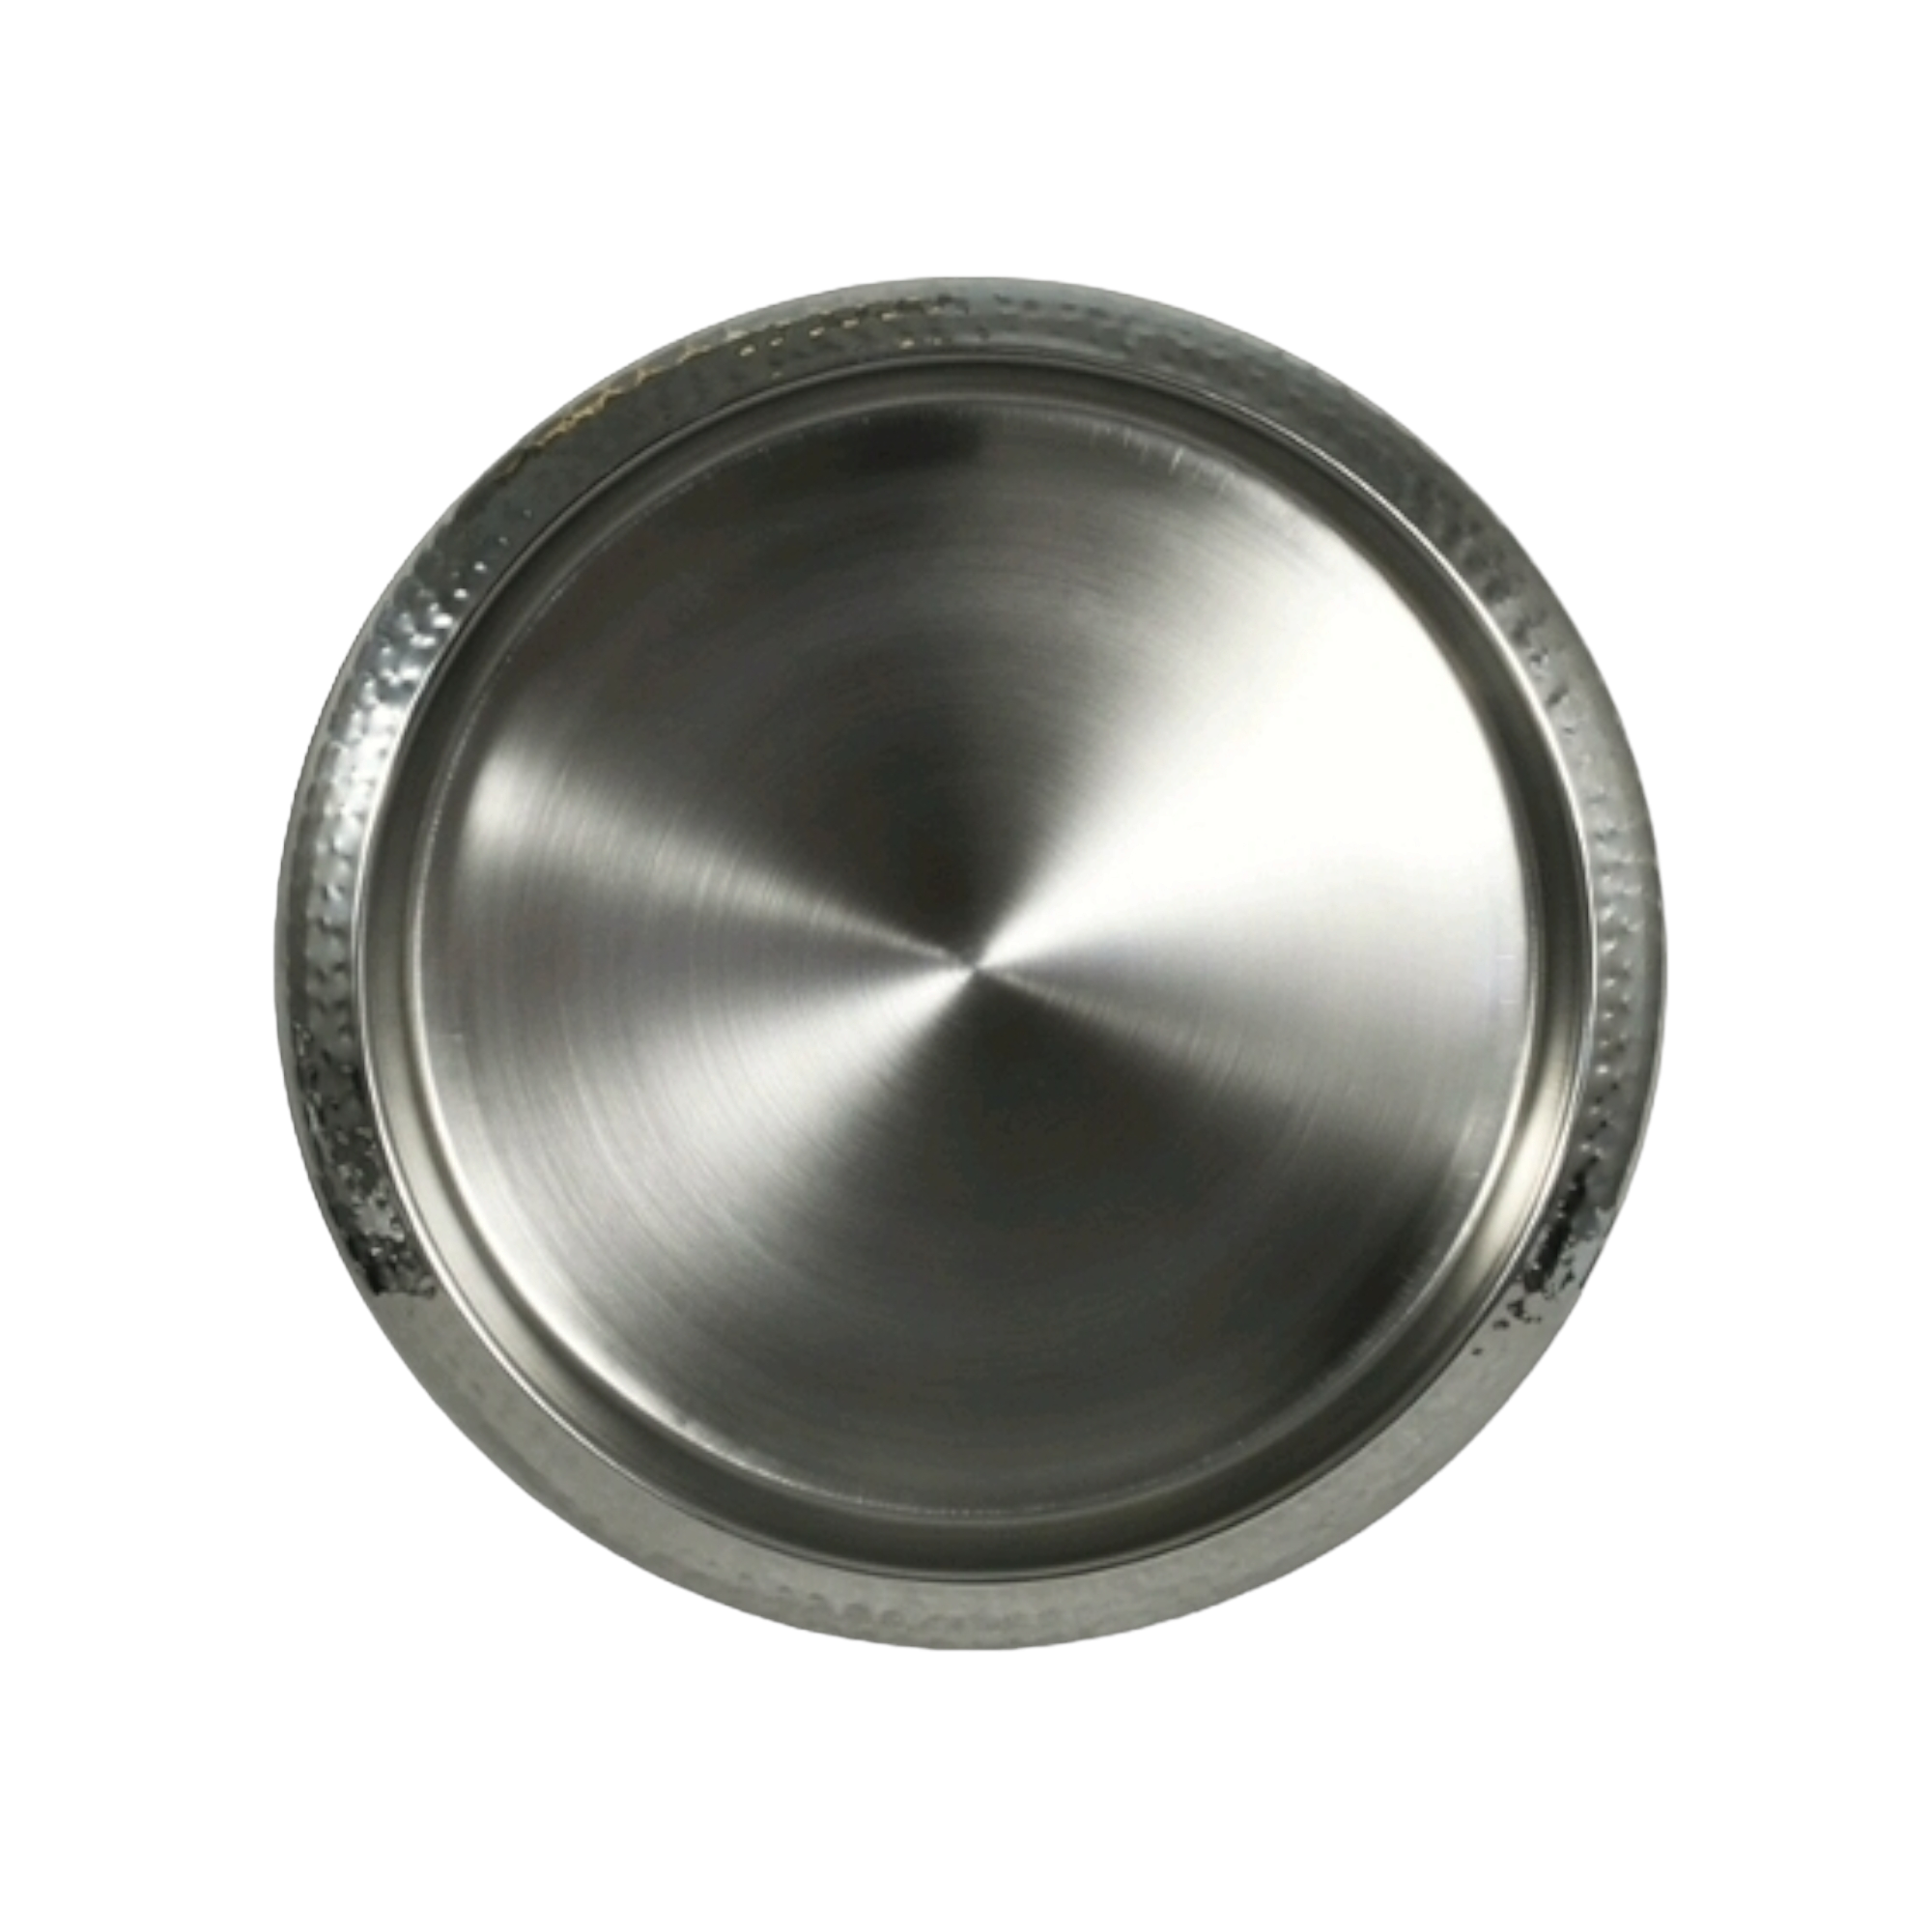 Serving Tray Hammered 35cm Stainless Steel 13161